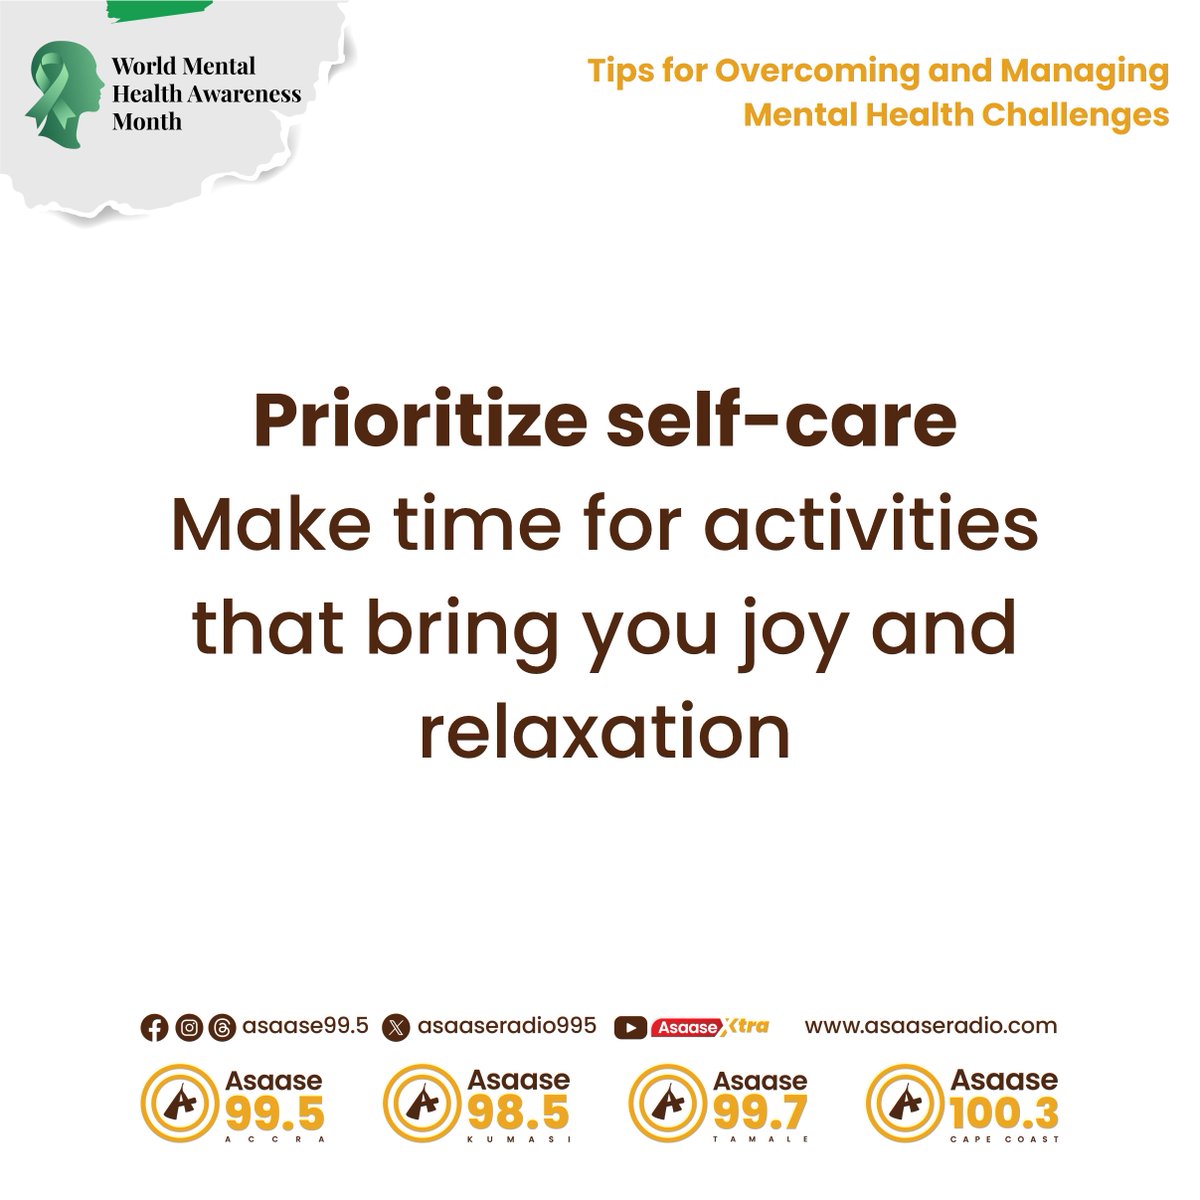 Prioritize self-care: Make time for activities that bring you joy and relaxation. #AsaaseRadio | #MentalHealthAwareness | #SpeakForMentalHealth